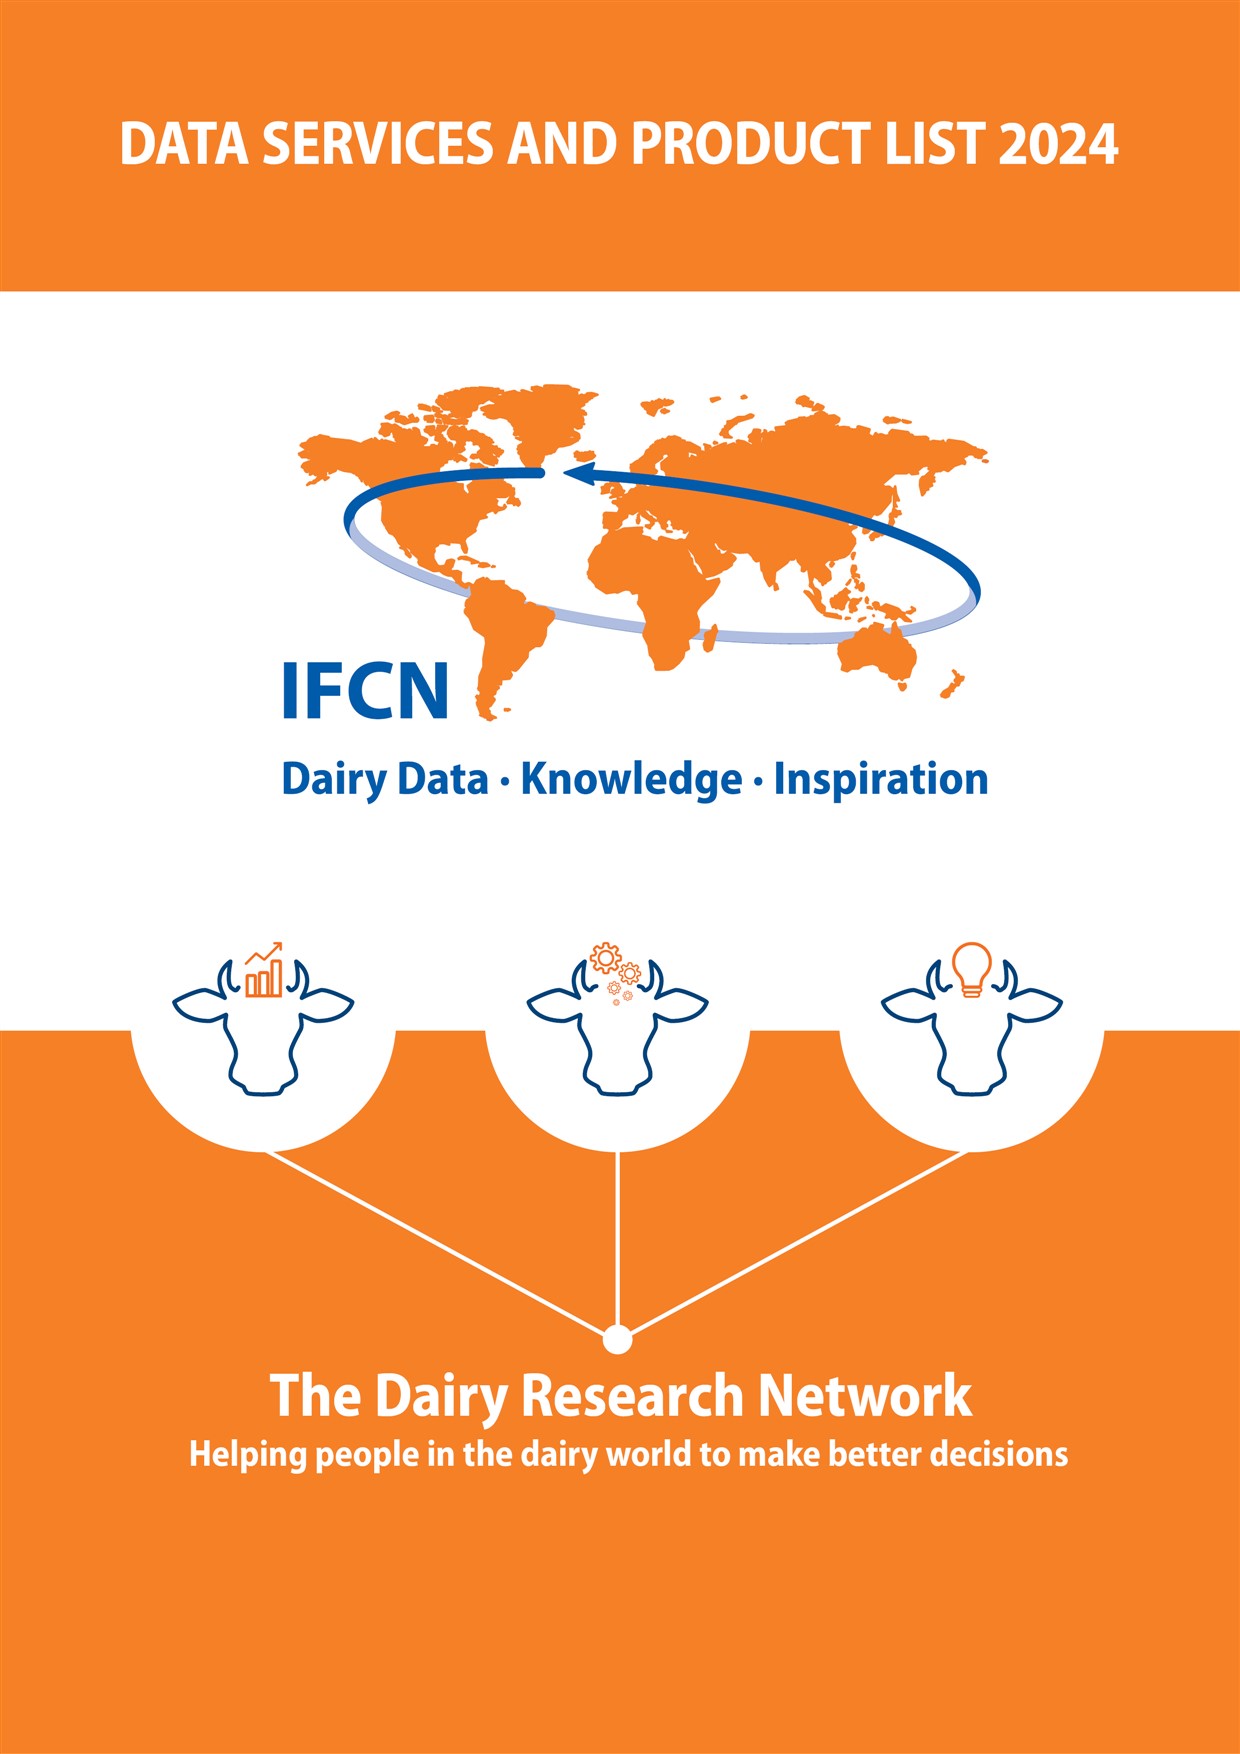 IFCN Data and services